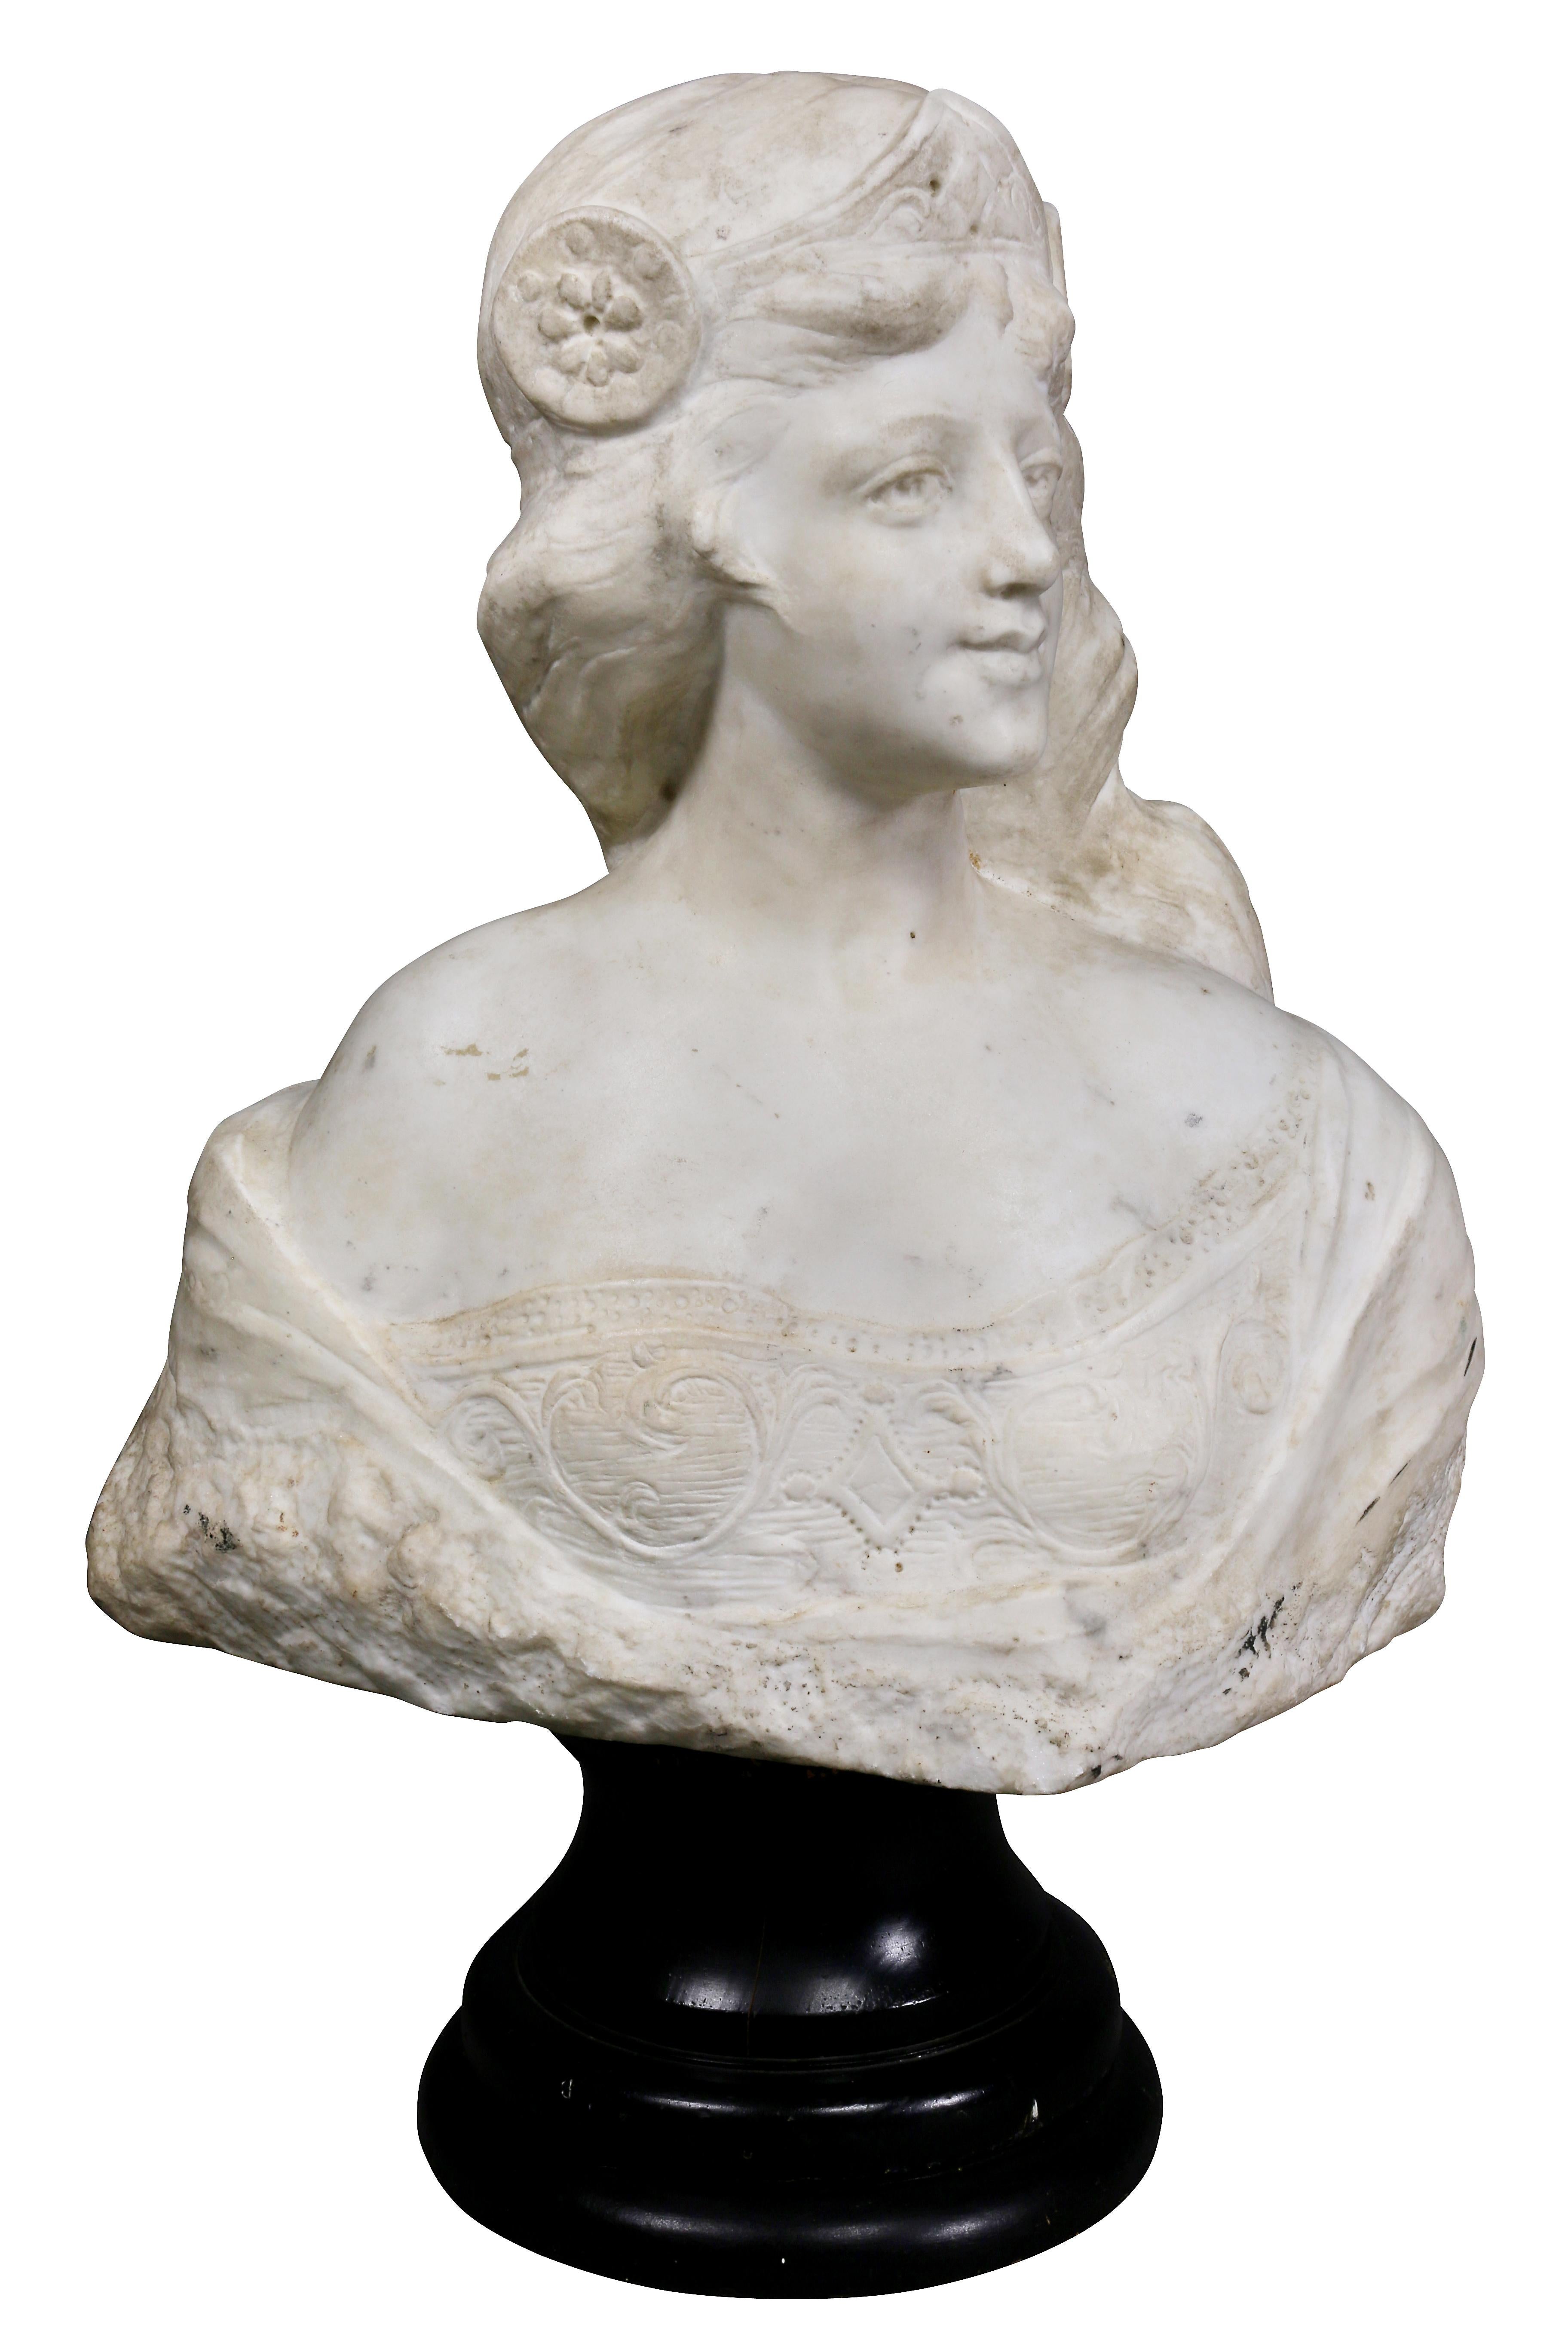 19th Century French Art Nouveau White Marble Bust of a Woman For Sale